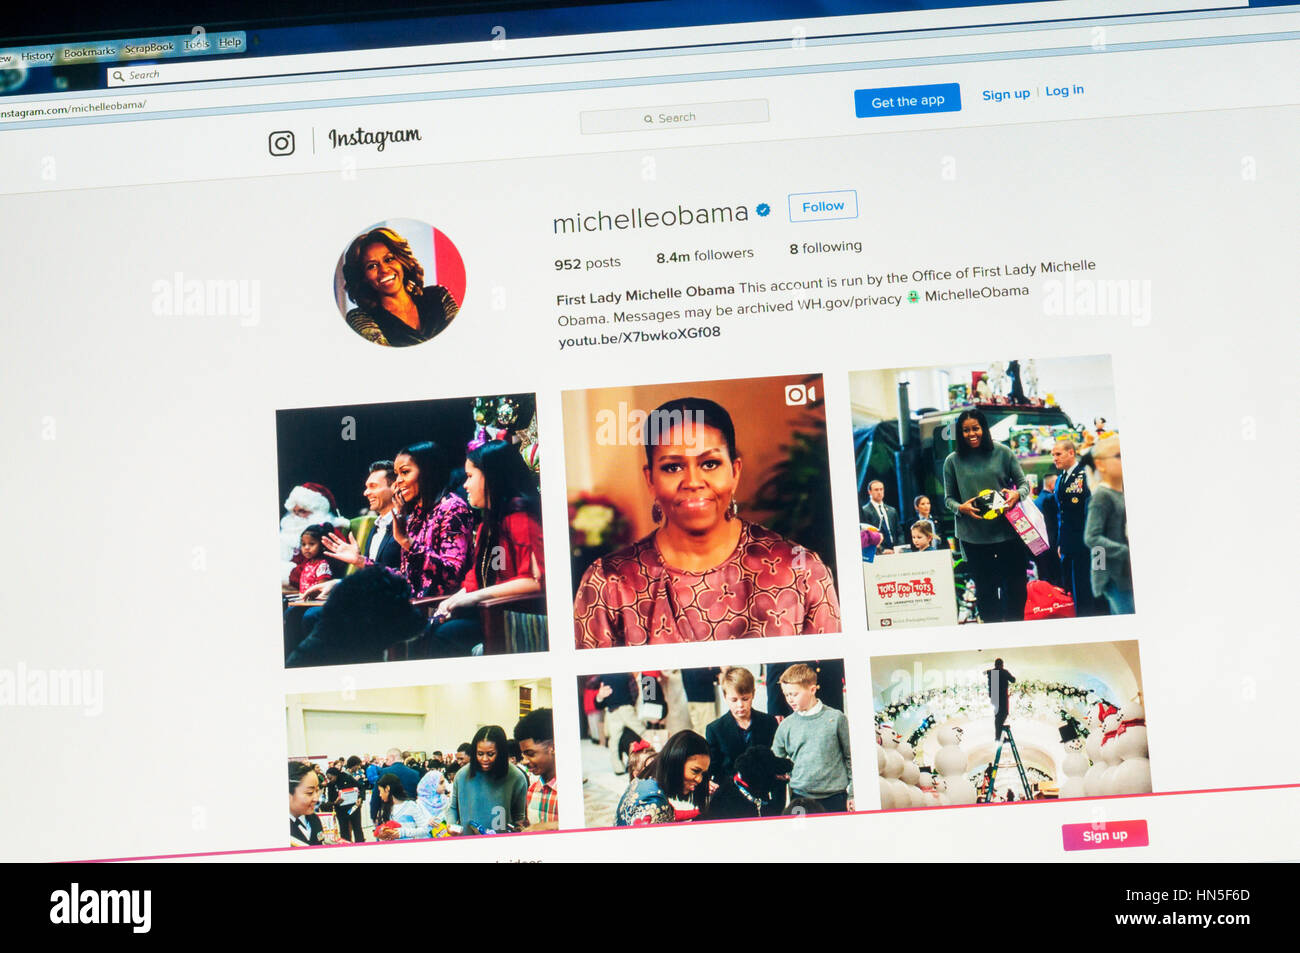 The Instagram account of Michelle Obama, the former first lady of the United States. Stock Photo